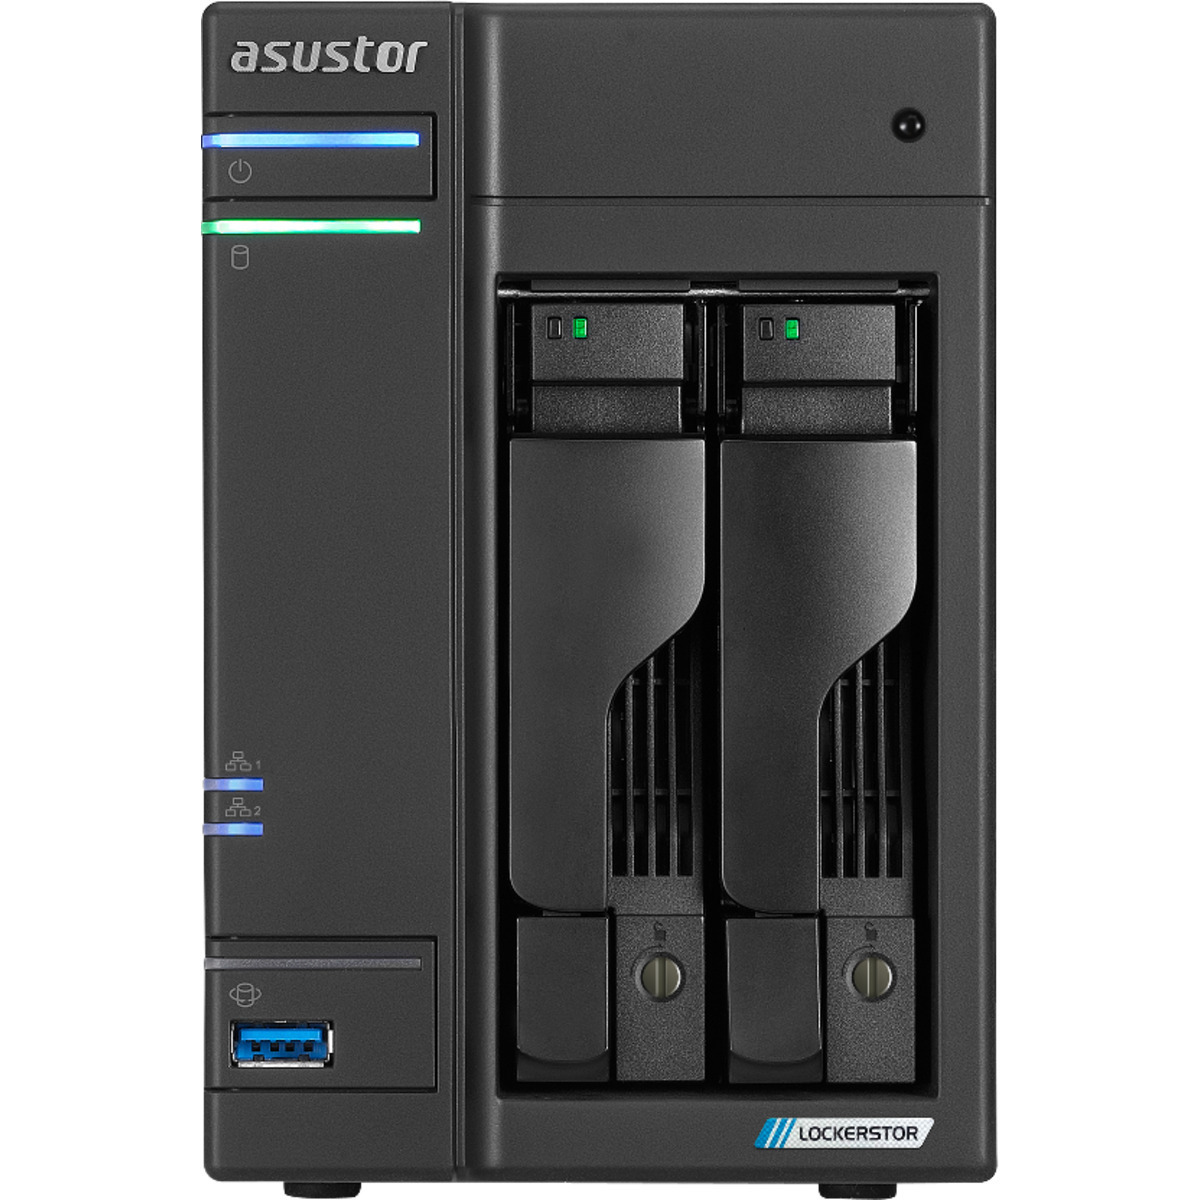 ASUSTOR LOCKERSTOR 2 Gen2 AS6702T 4tb 2-Bay Desktop Multimedia / Power User / Business NAS - Network Attached Storage Device 2x2tb Crucial MX500 CT2000MX500SSD1 2.5 560/510MB/s SATA 6Gb/s SSD CONSUMER Class Drives Installed - Burn-In Tested - FREE RAM UPGRADE LOCKERSTOR 2 Gen2 AS6702T